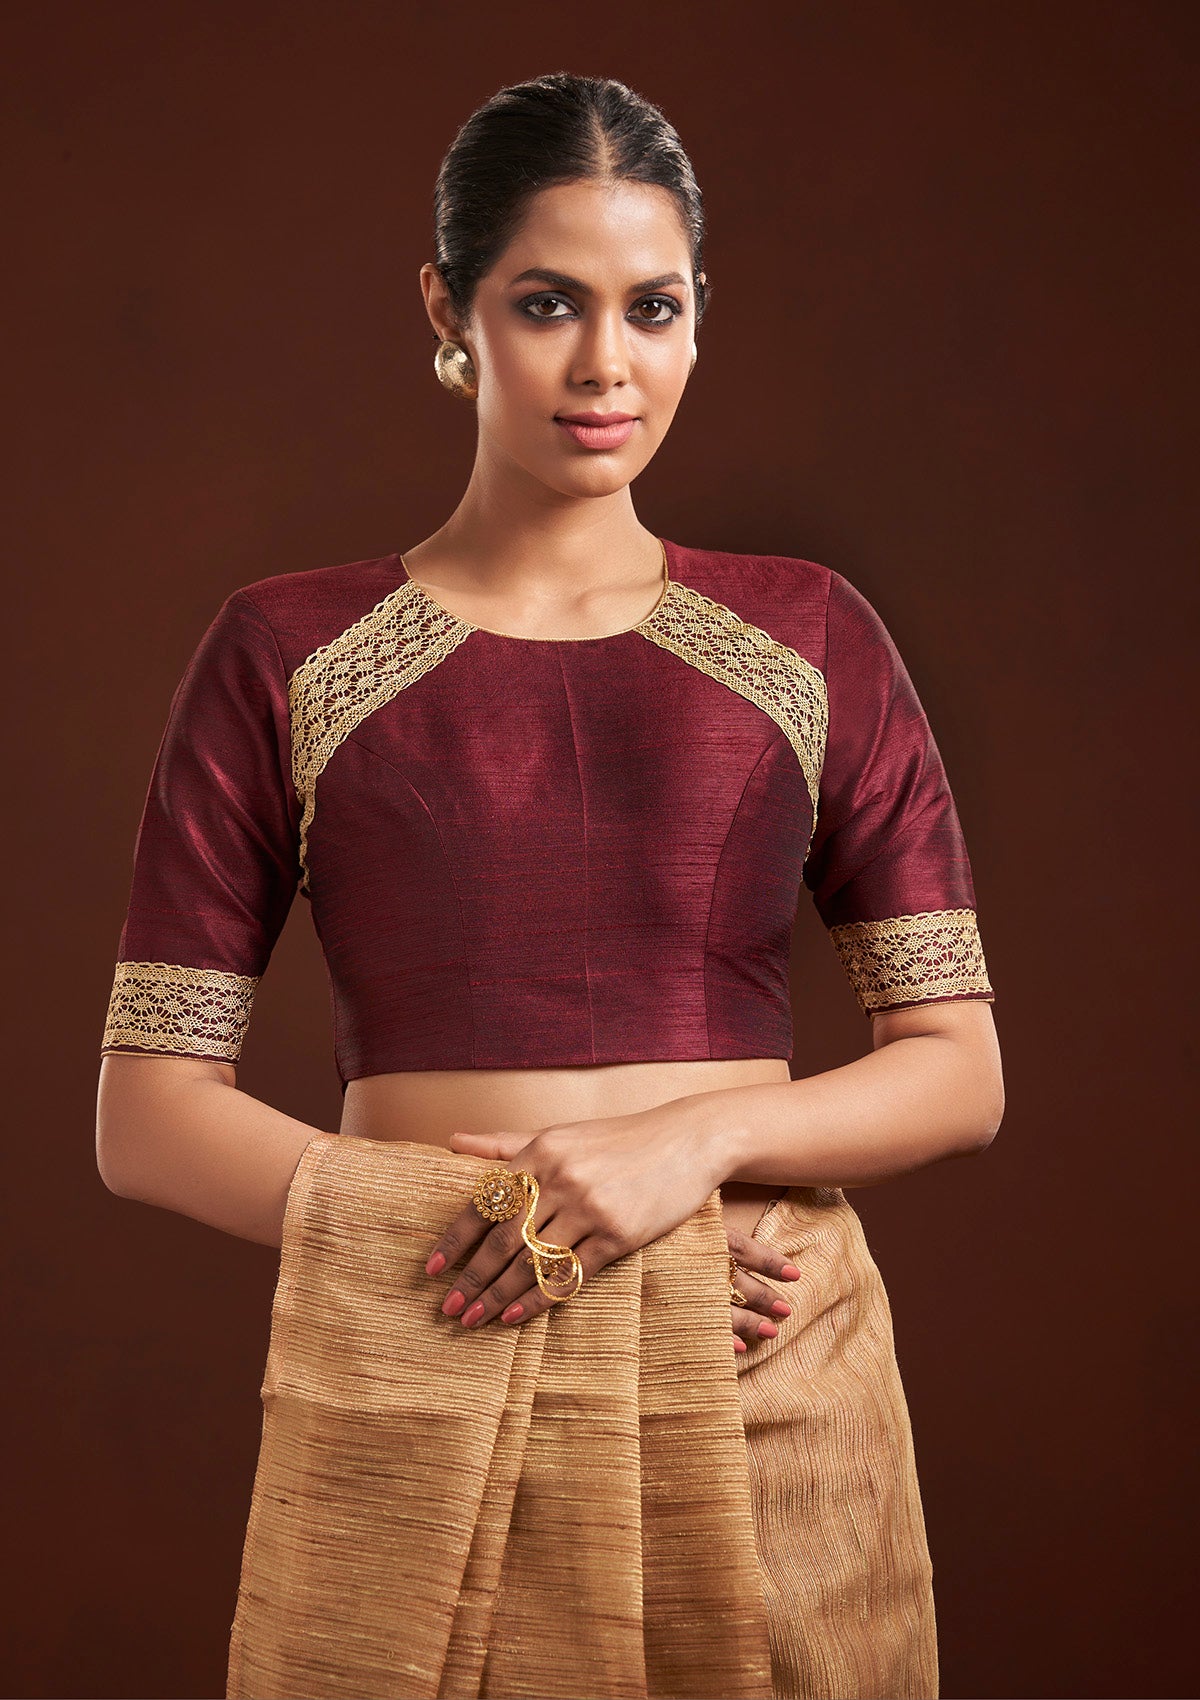 Saree Neck Blouse Designs: 10 Trendy Looks To Flaunt In, 40% OFF